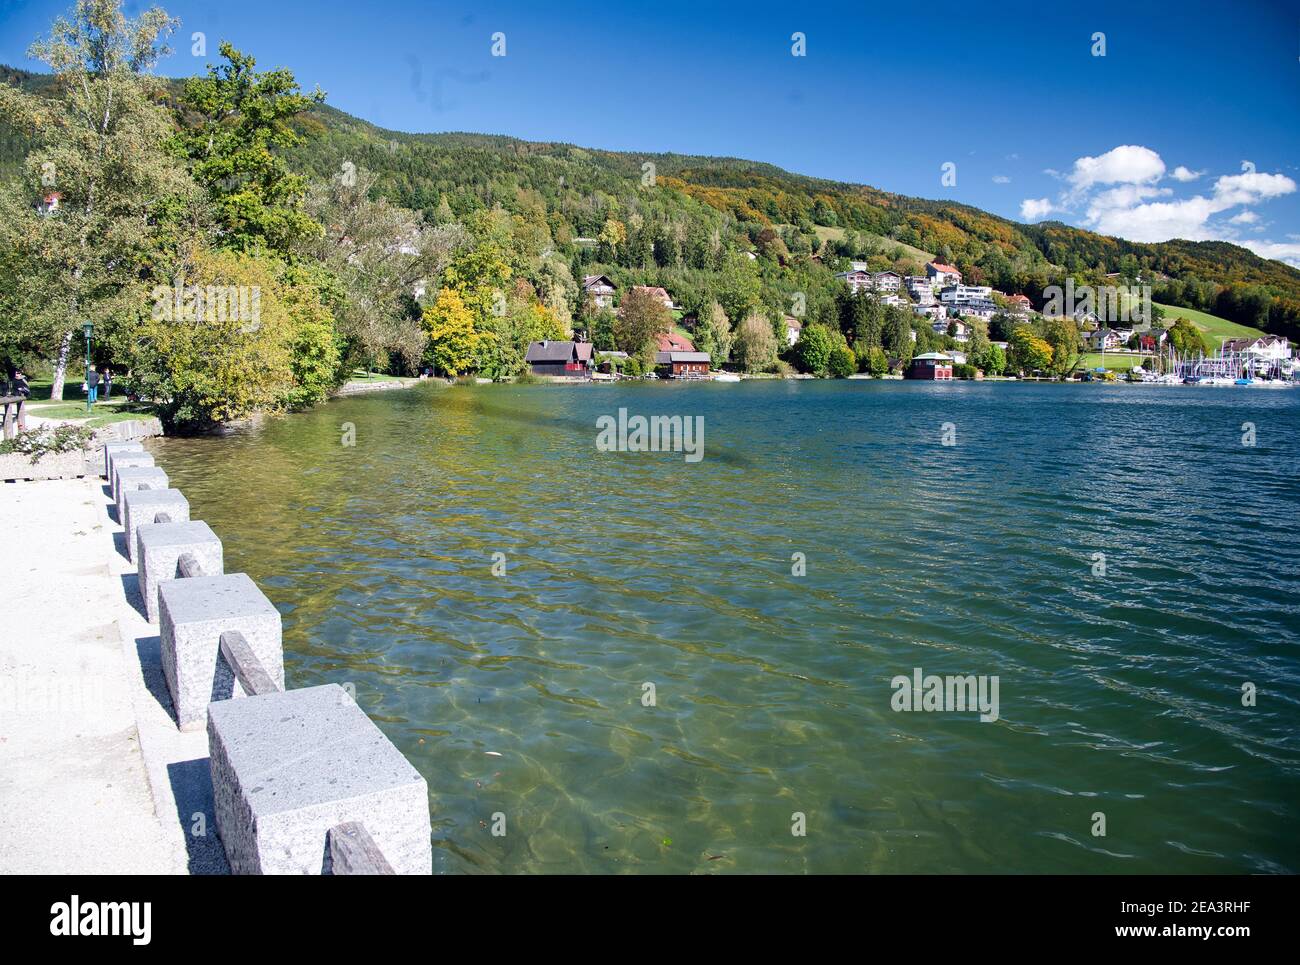 On the shore of lake Mondsee Stock Photo